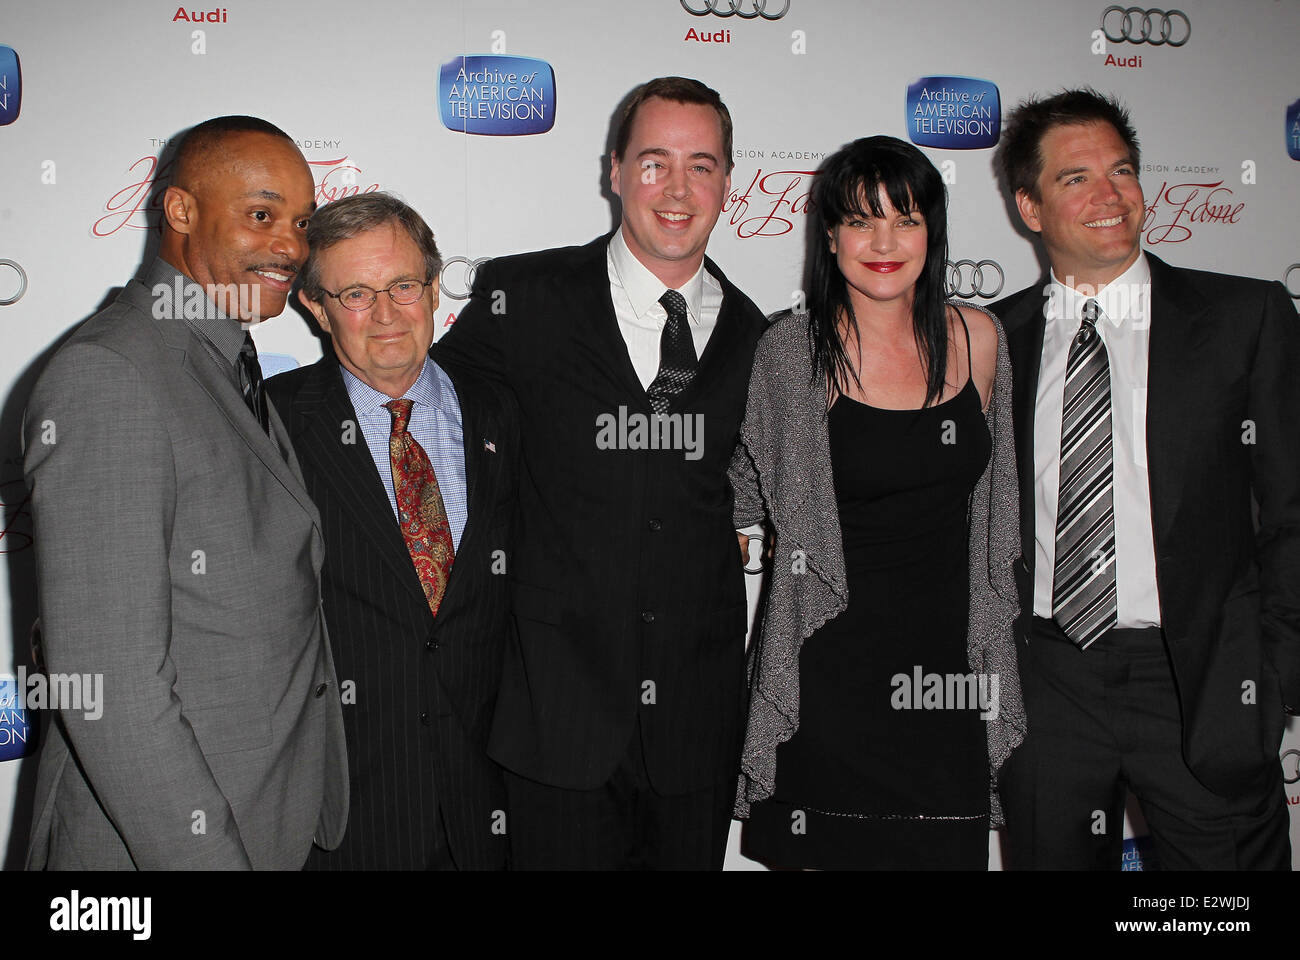 The Academy of Television Arts & Sciences' 22nd Annual Hall of Fame Induction Gala at The Beverly Hilton Hotel - Arrivals  Featuring: Rocky Carroll,David McCallum,Sean Murray,Pauley Perrette and Michael Weatherly Where: Beverly Hills, California, United S Stock Photo